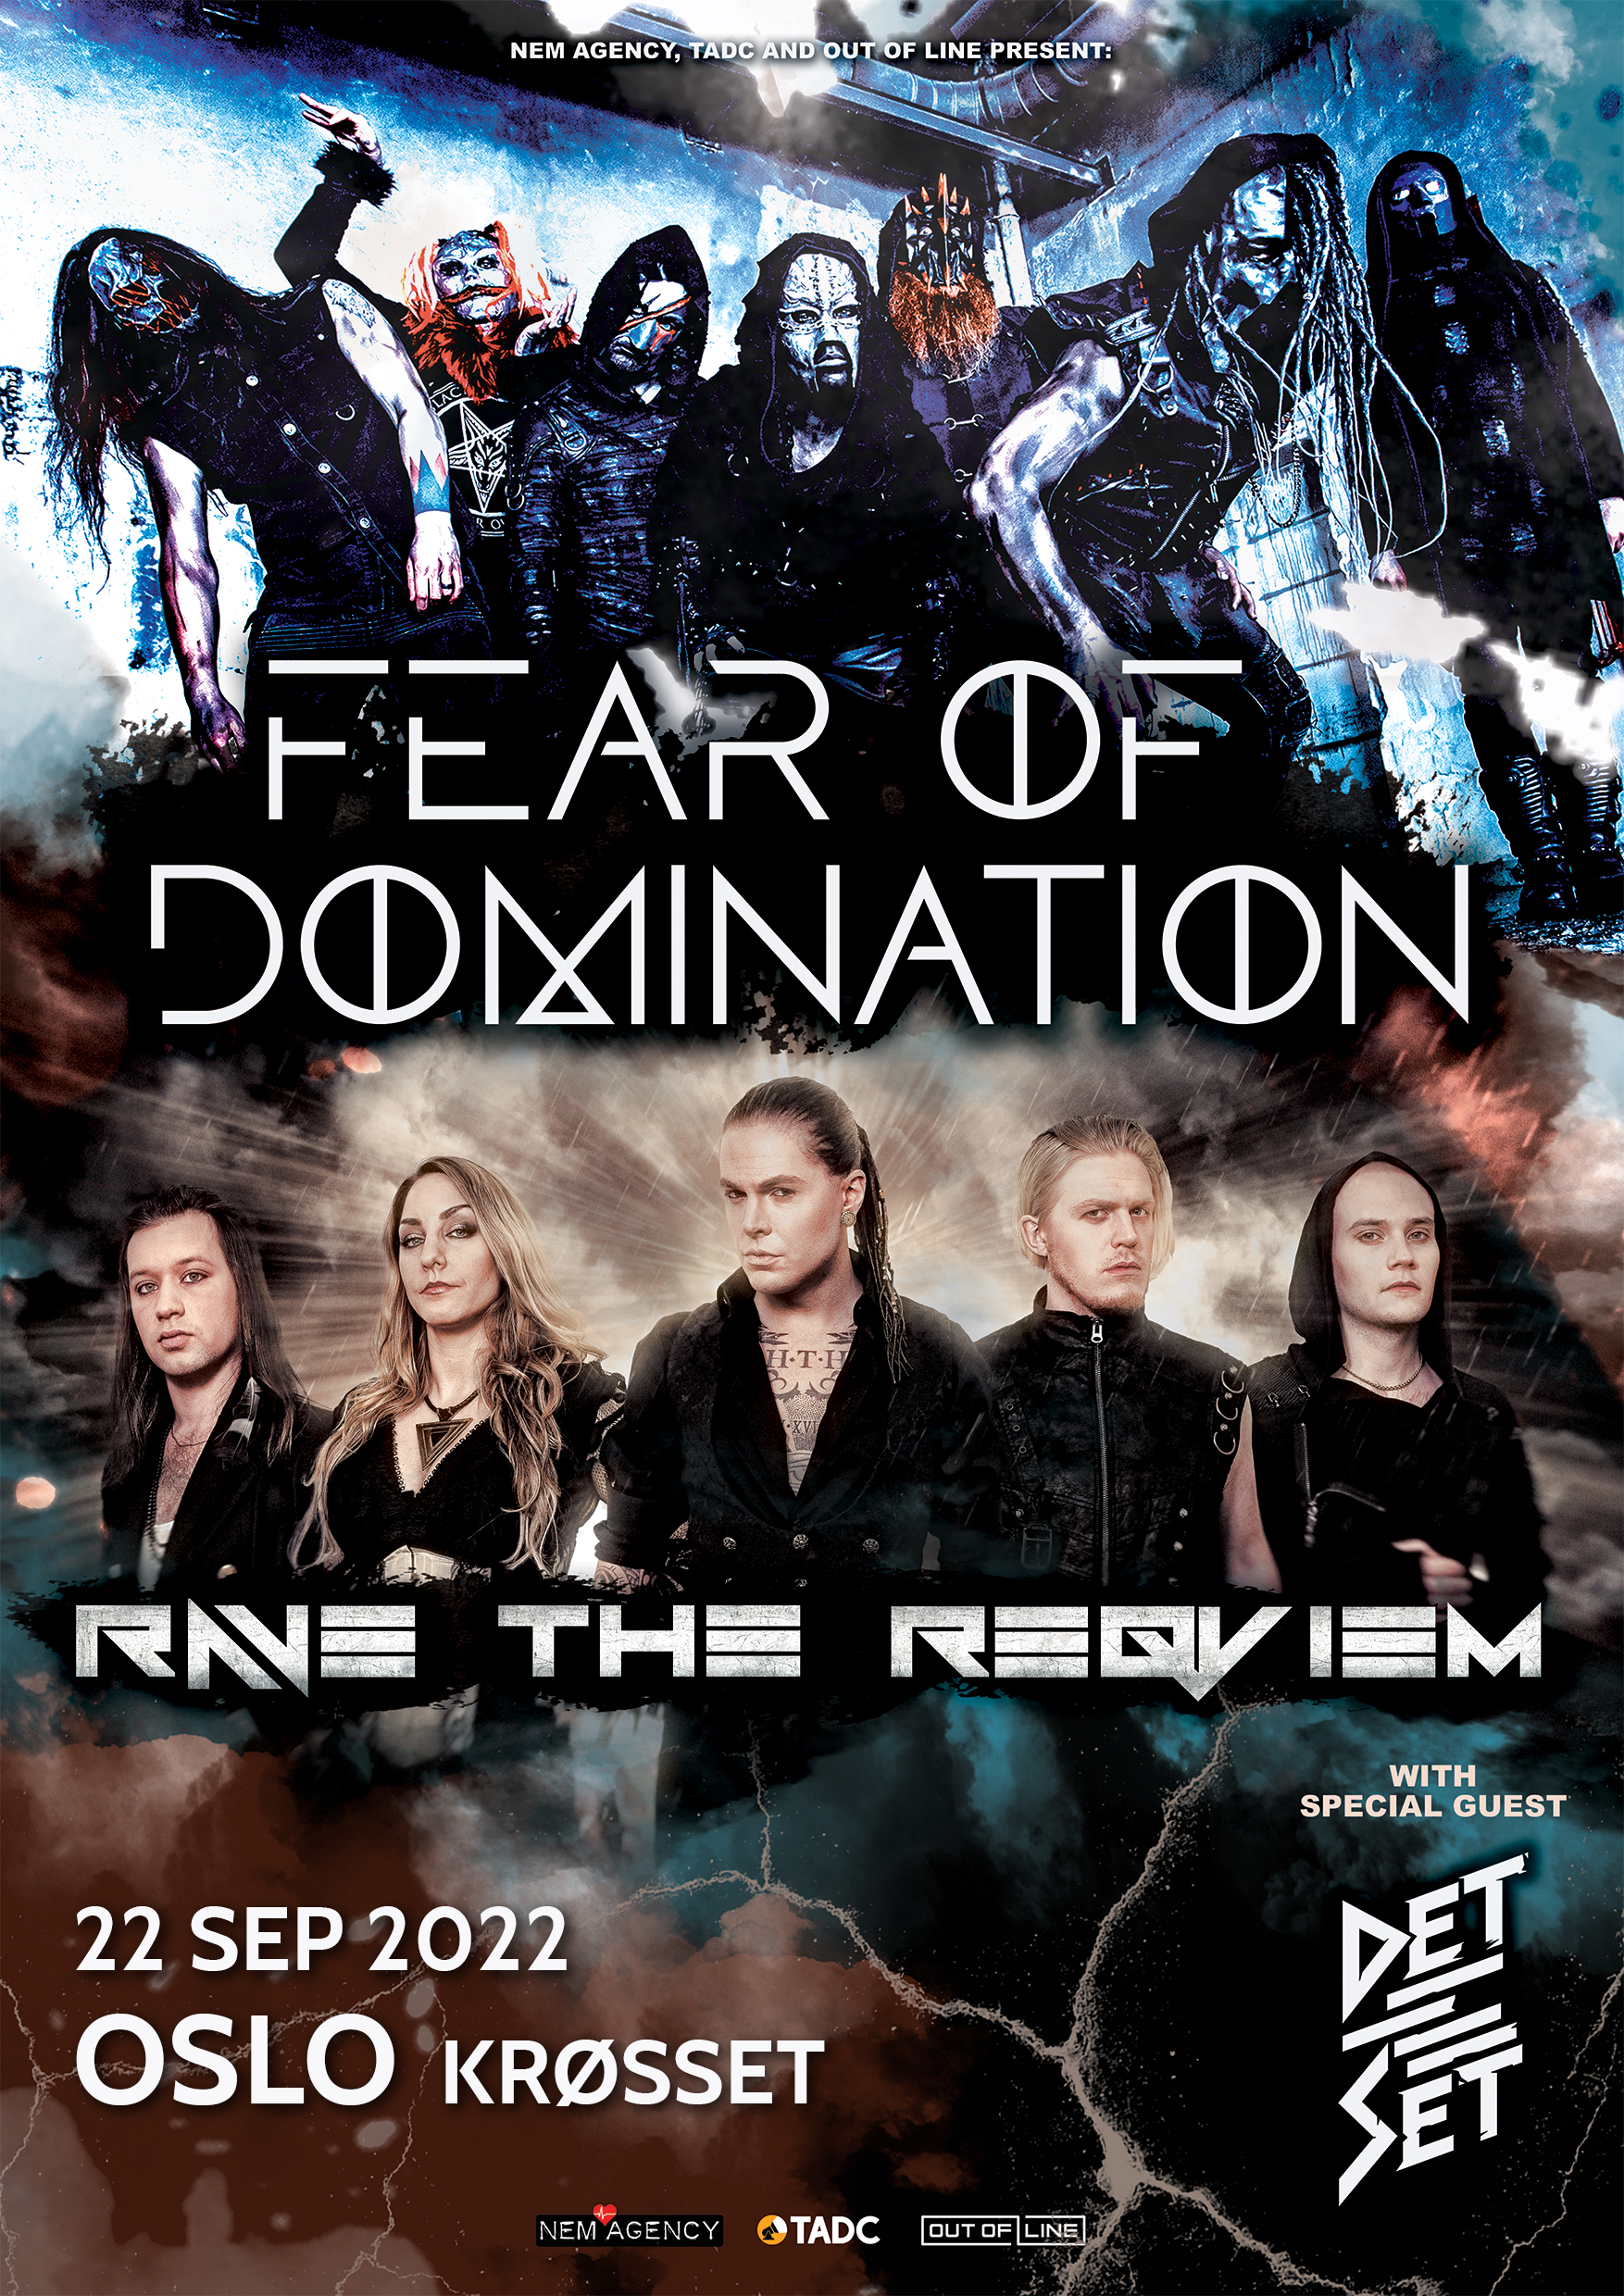 FEAR OF DOMINATION + RAVE THE REQVIEM